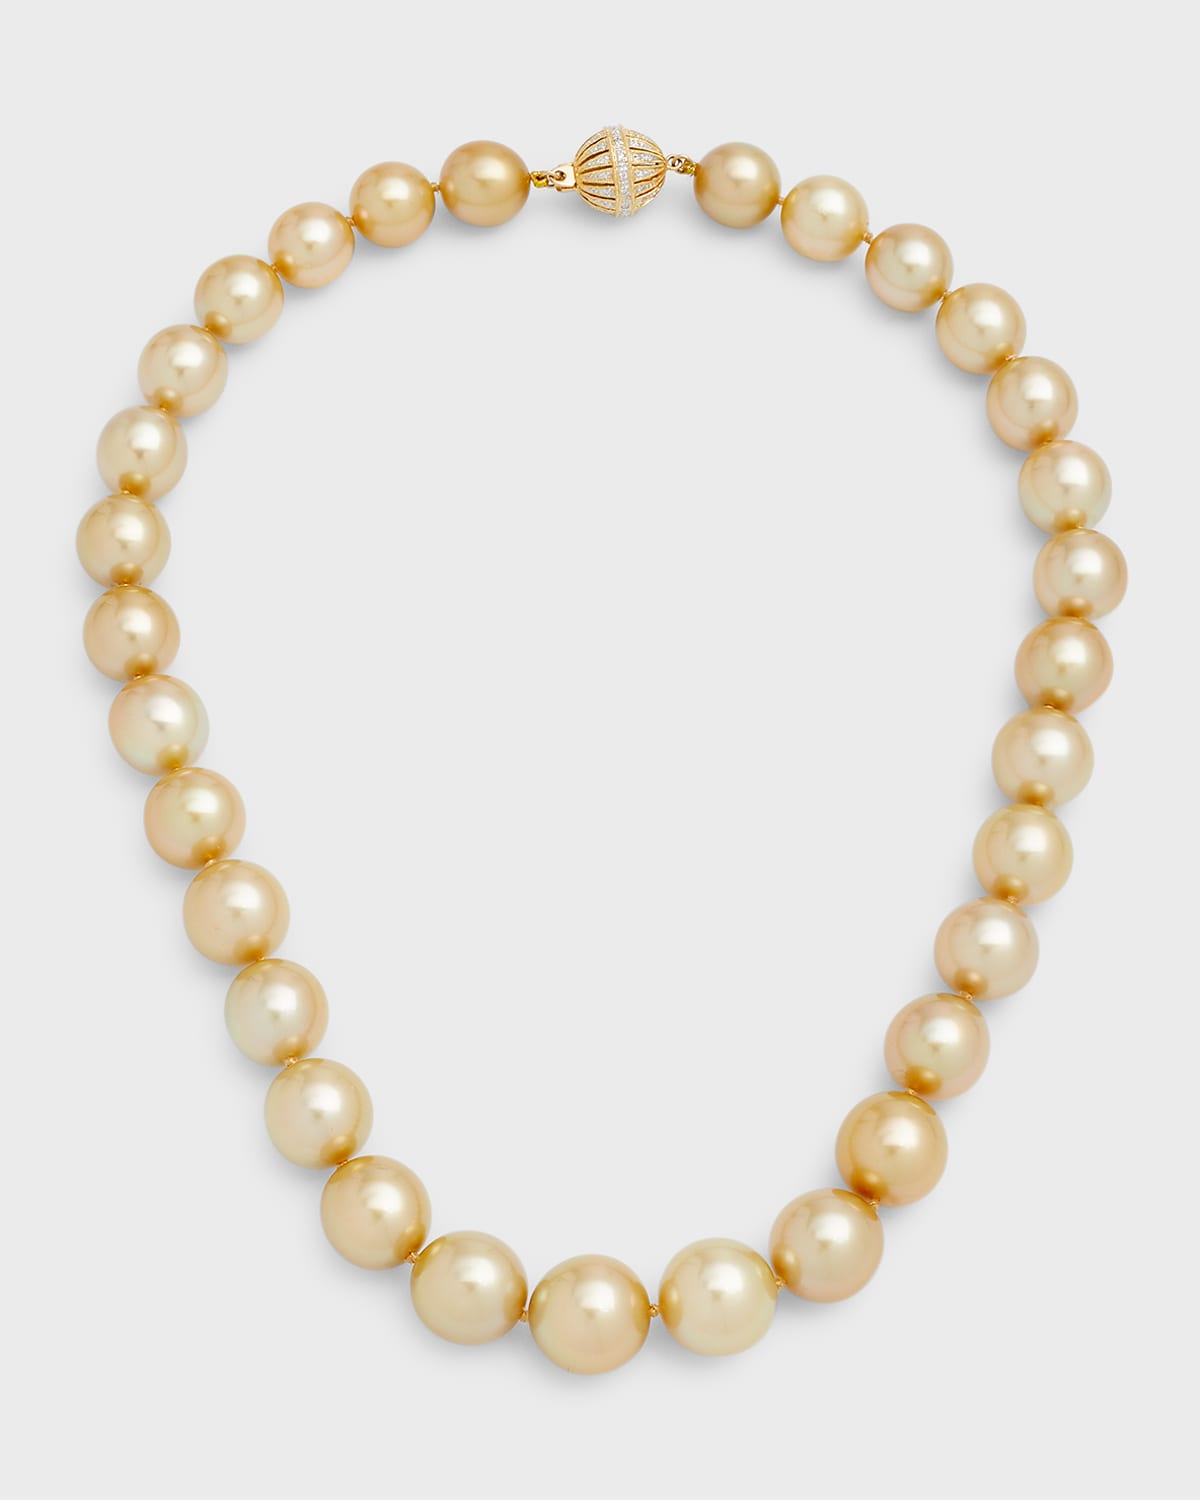 18K Yellow Gold Golden Pearl Necklace with Diamond Clasp, 18"L